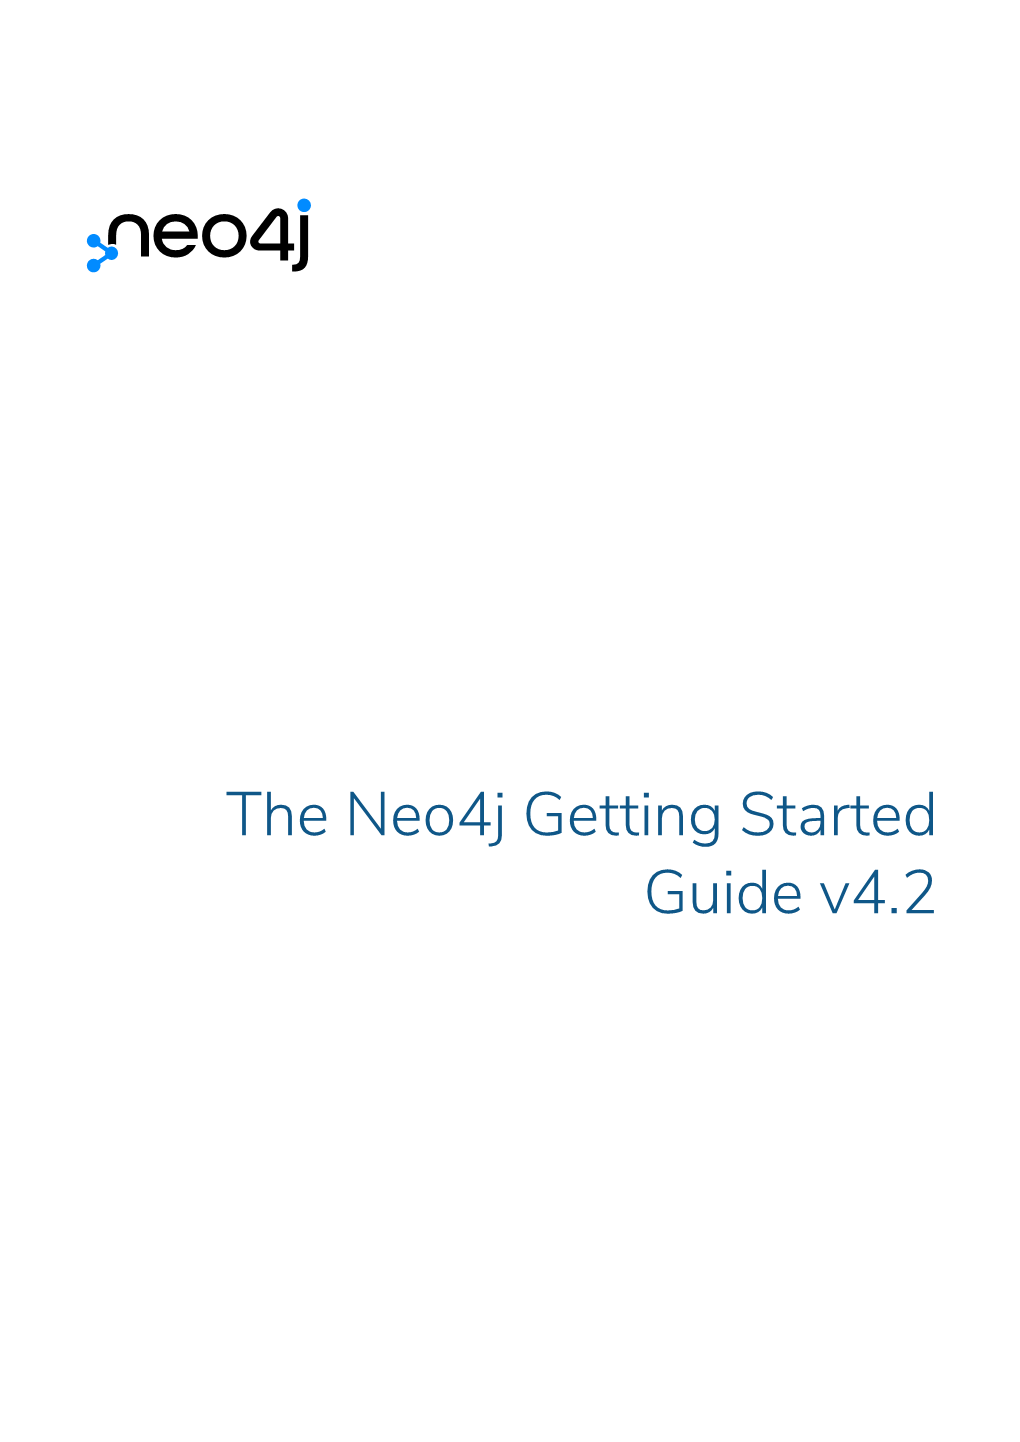 The Neo4j Getting Started Guide V4.2 Table of Contents